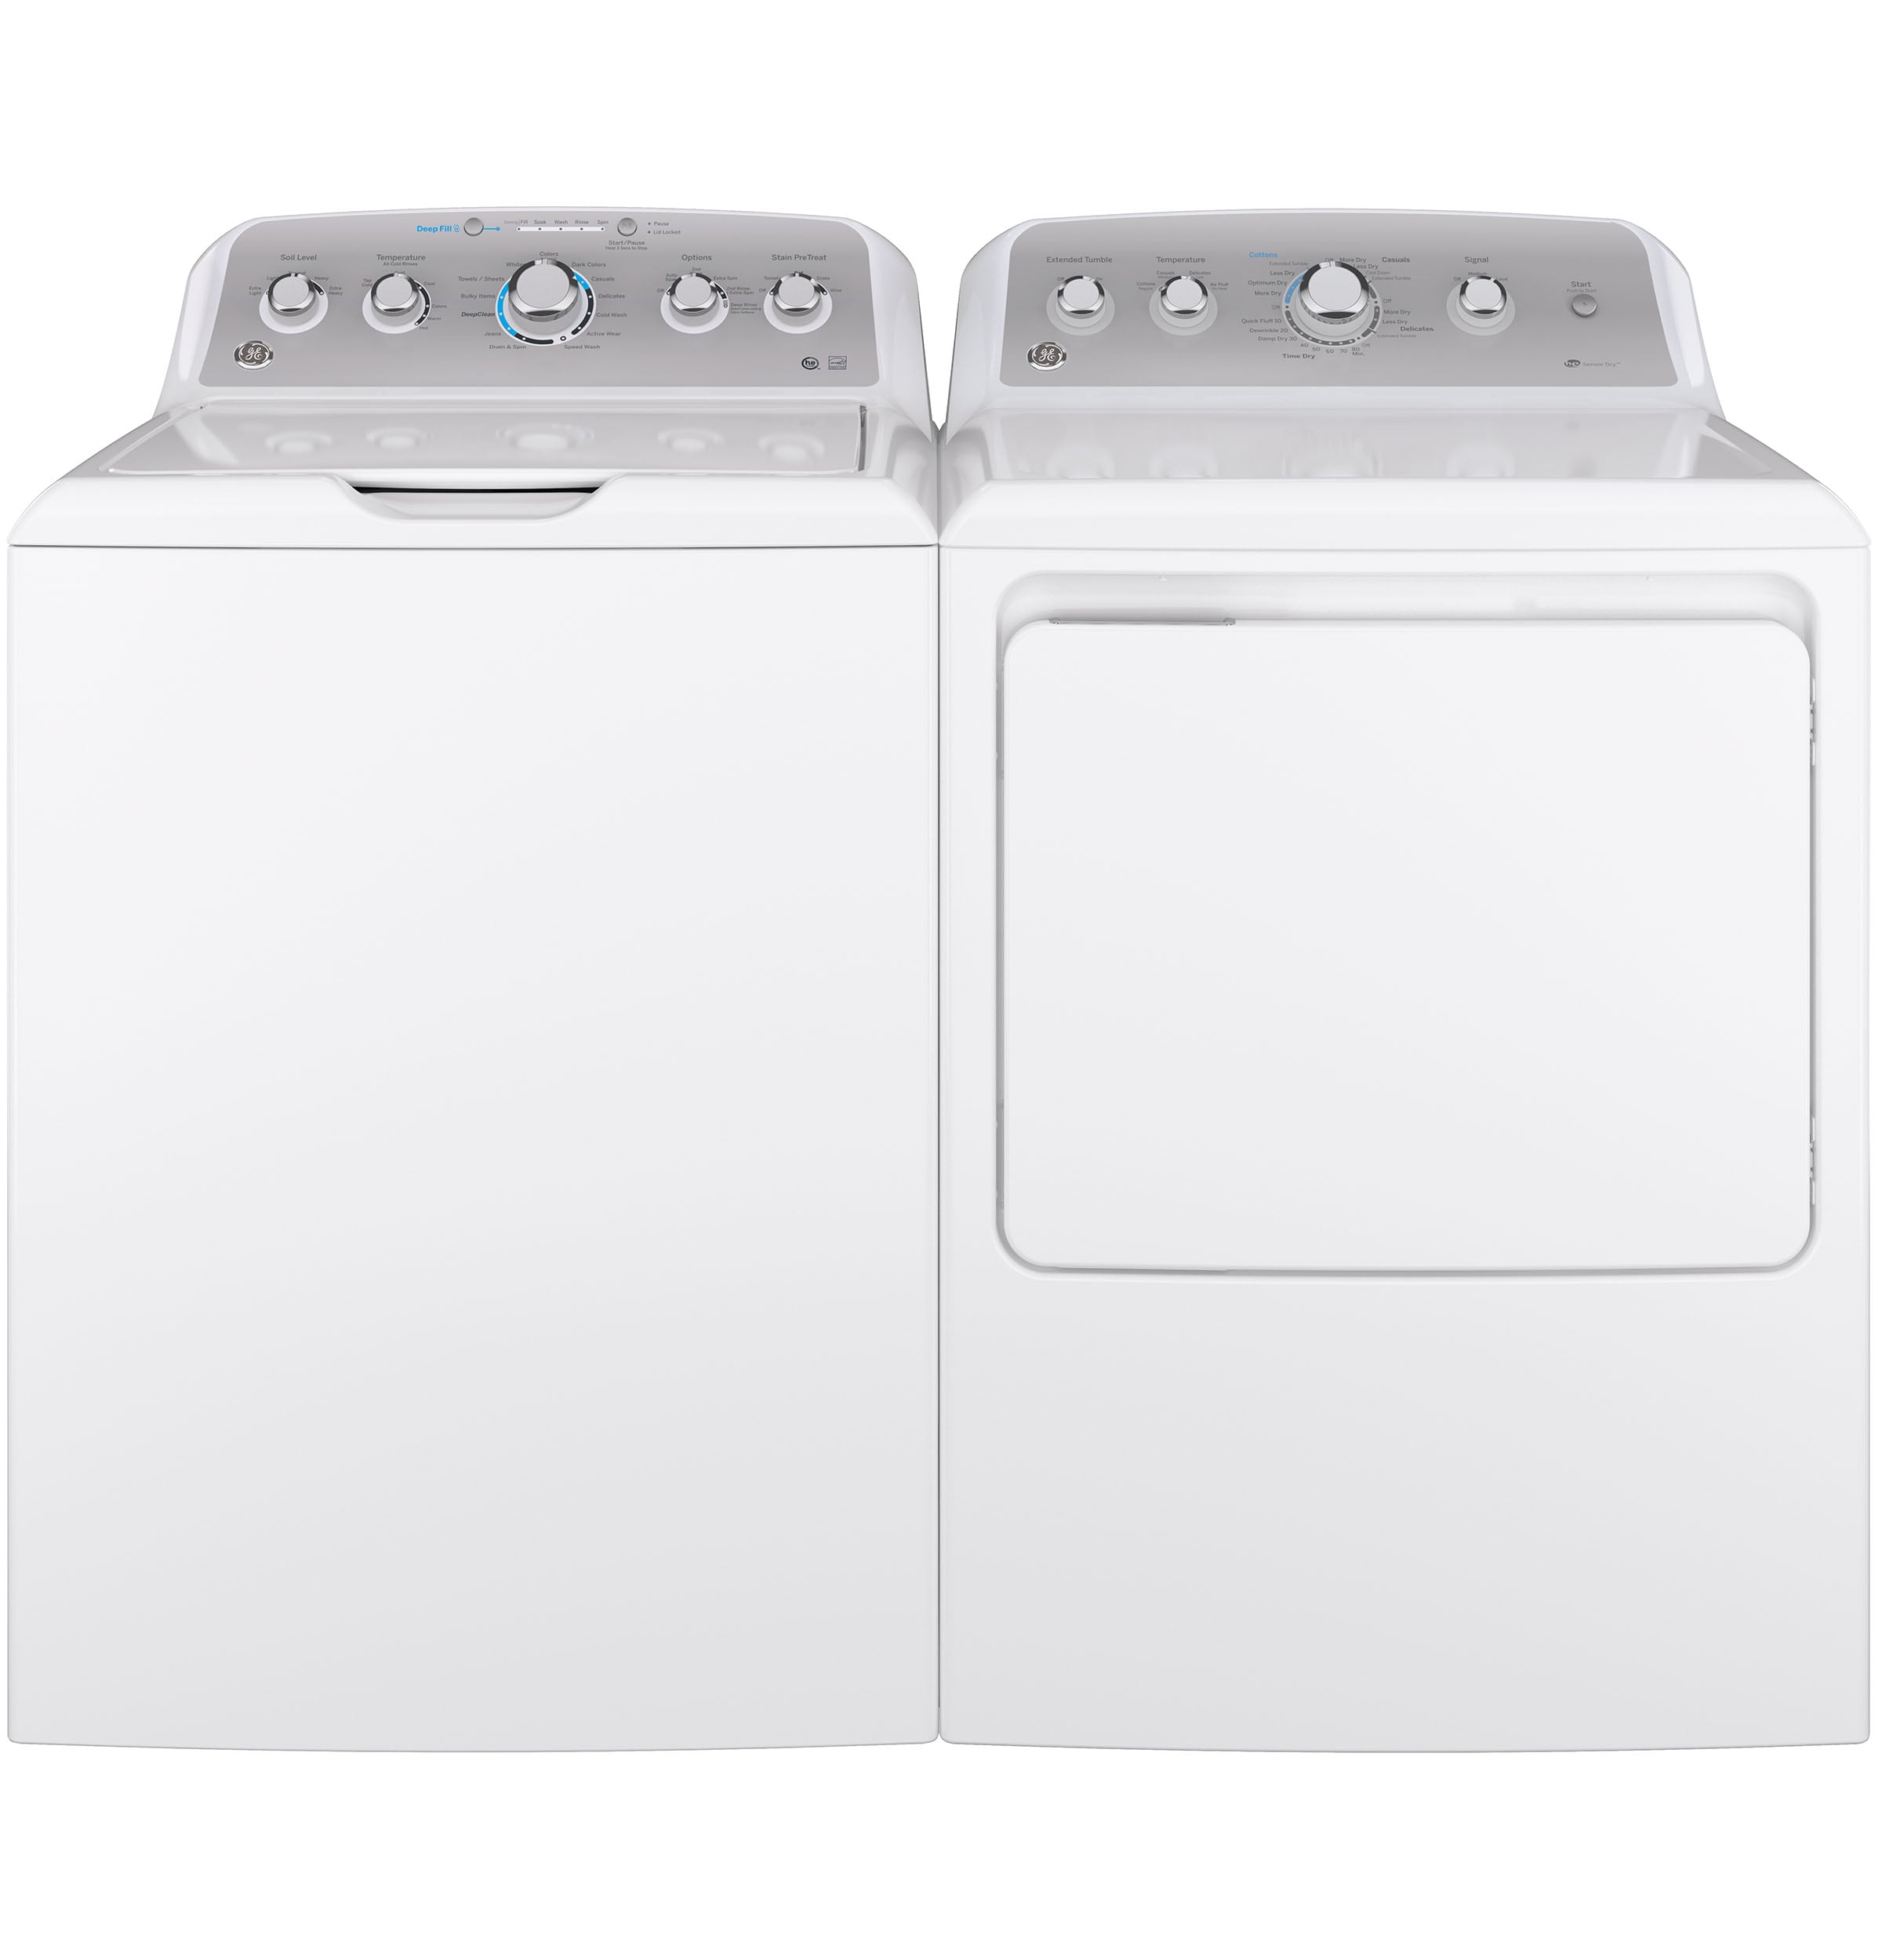 shop-ge-smart-top-load-washer-with-flexdispense-electric-dryer-set